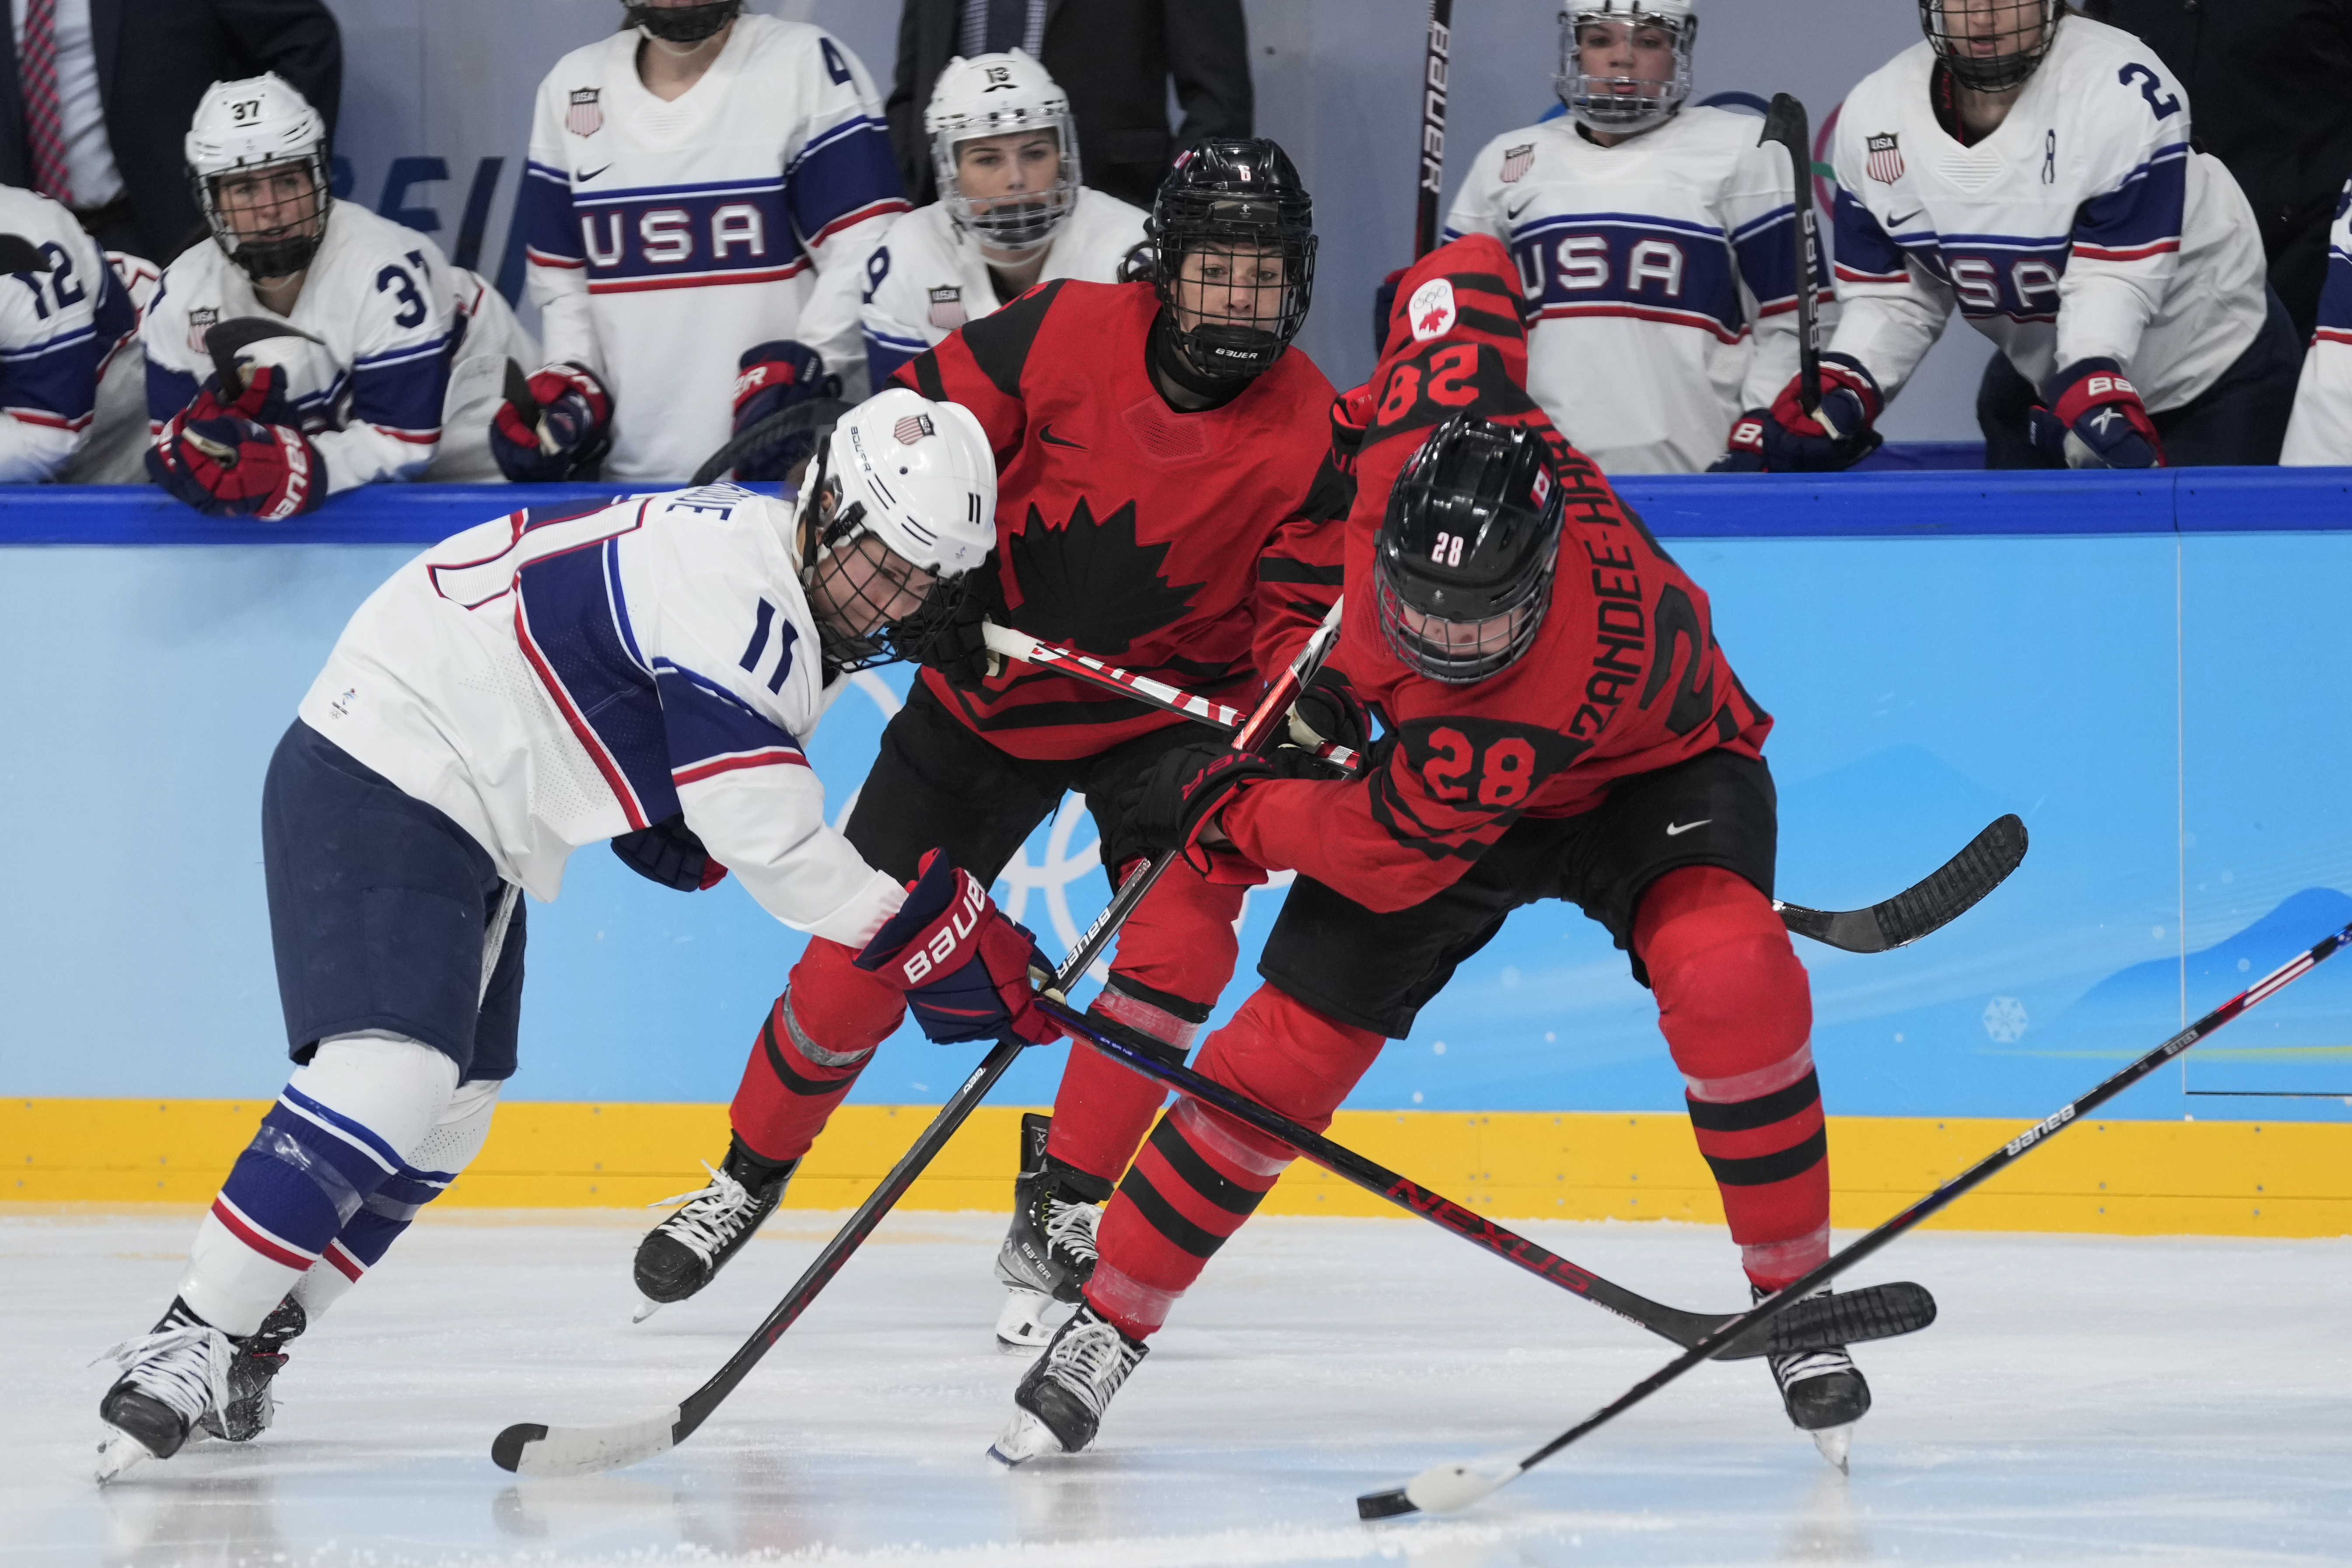 Canada's Women's Hockey Reinvents Itself After Olympic Loss